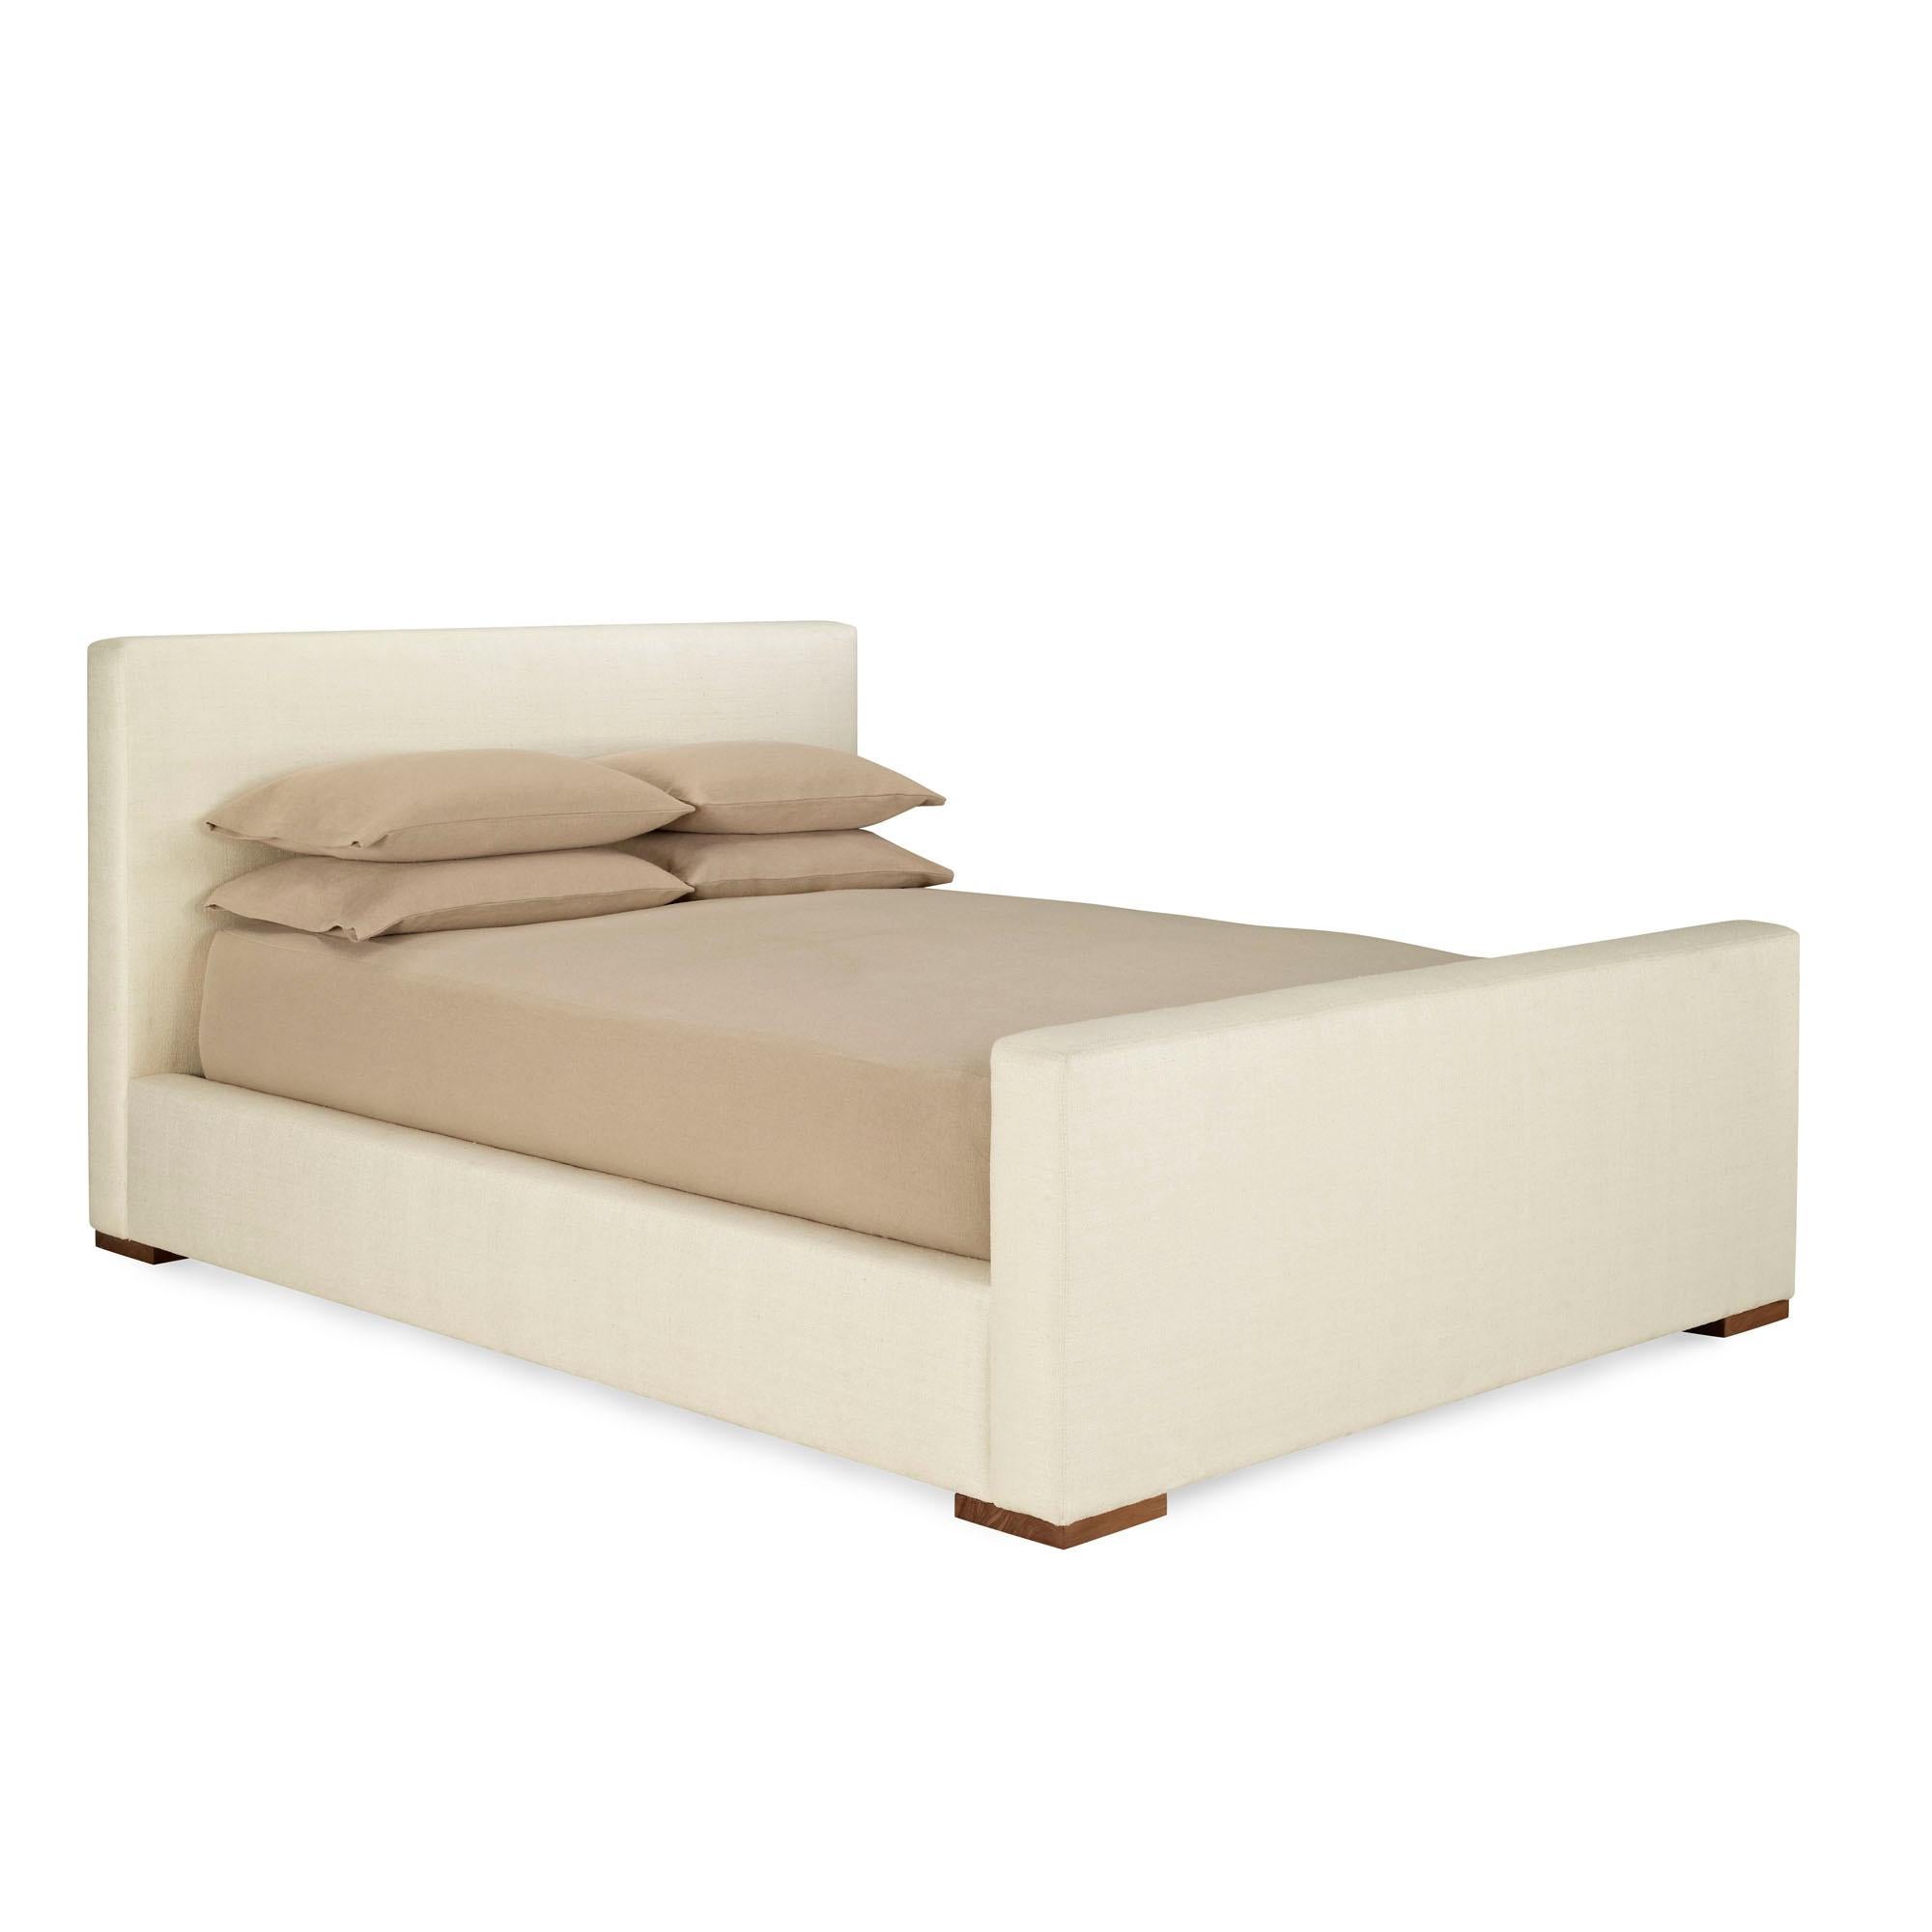 Ralph Lauren desert modern teak and cream silk king bed, custom, organic modern.

Supported by sturdy block feet, this bed embodies chic simplicity with its clean-lined design and padded, allover upholstery. Custom order from Ralph Lauren